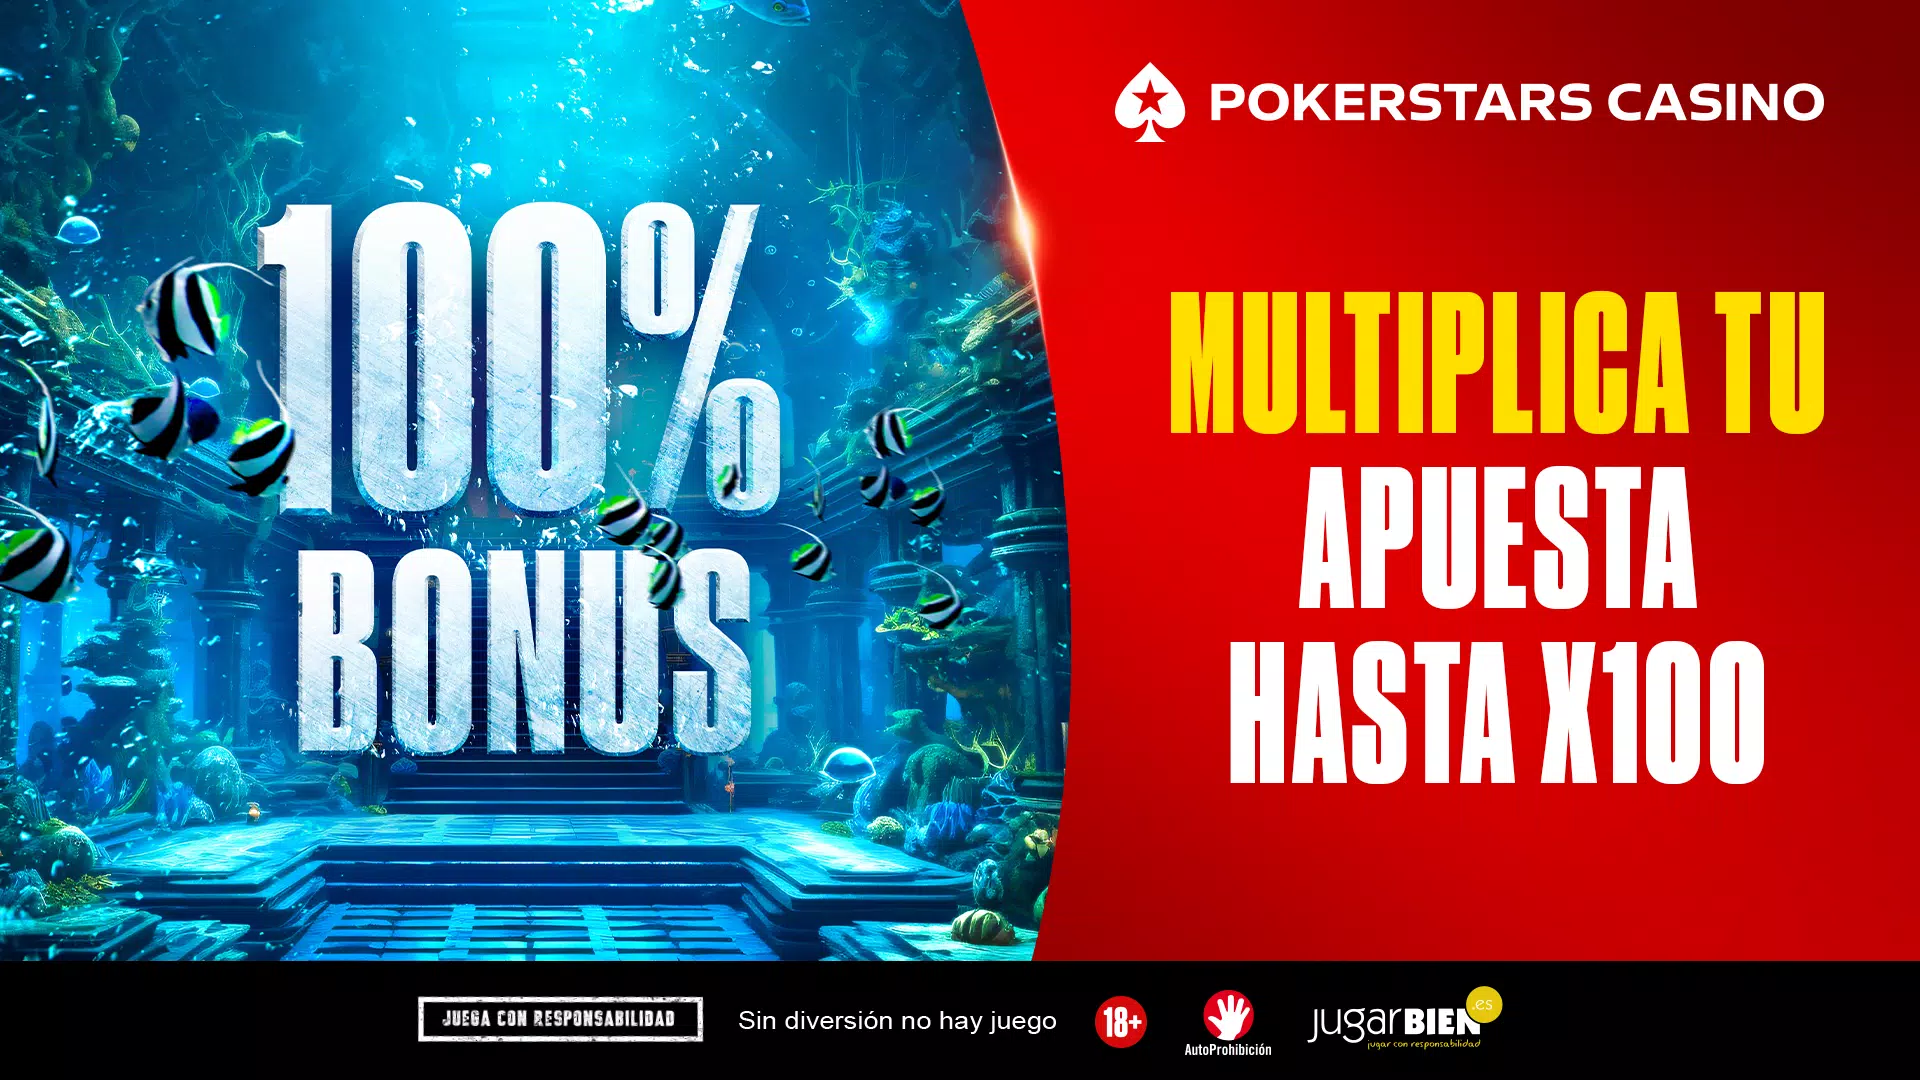 PokerStars Casino Ruleta Slots Apk Download for Android- Latest